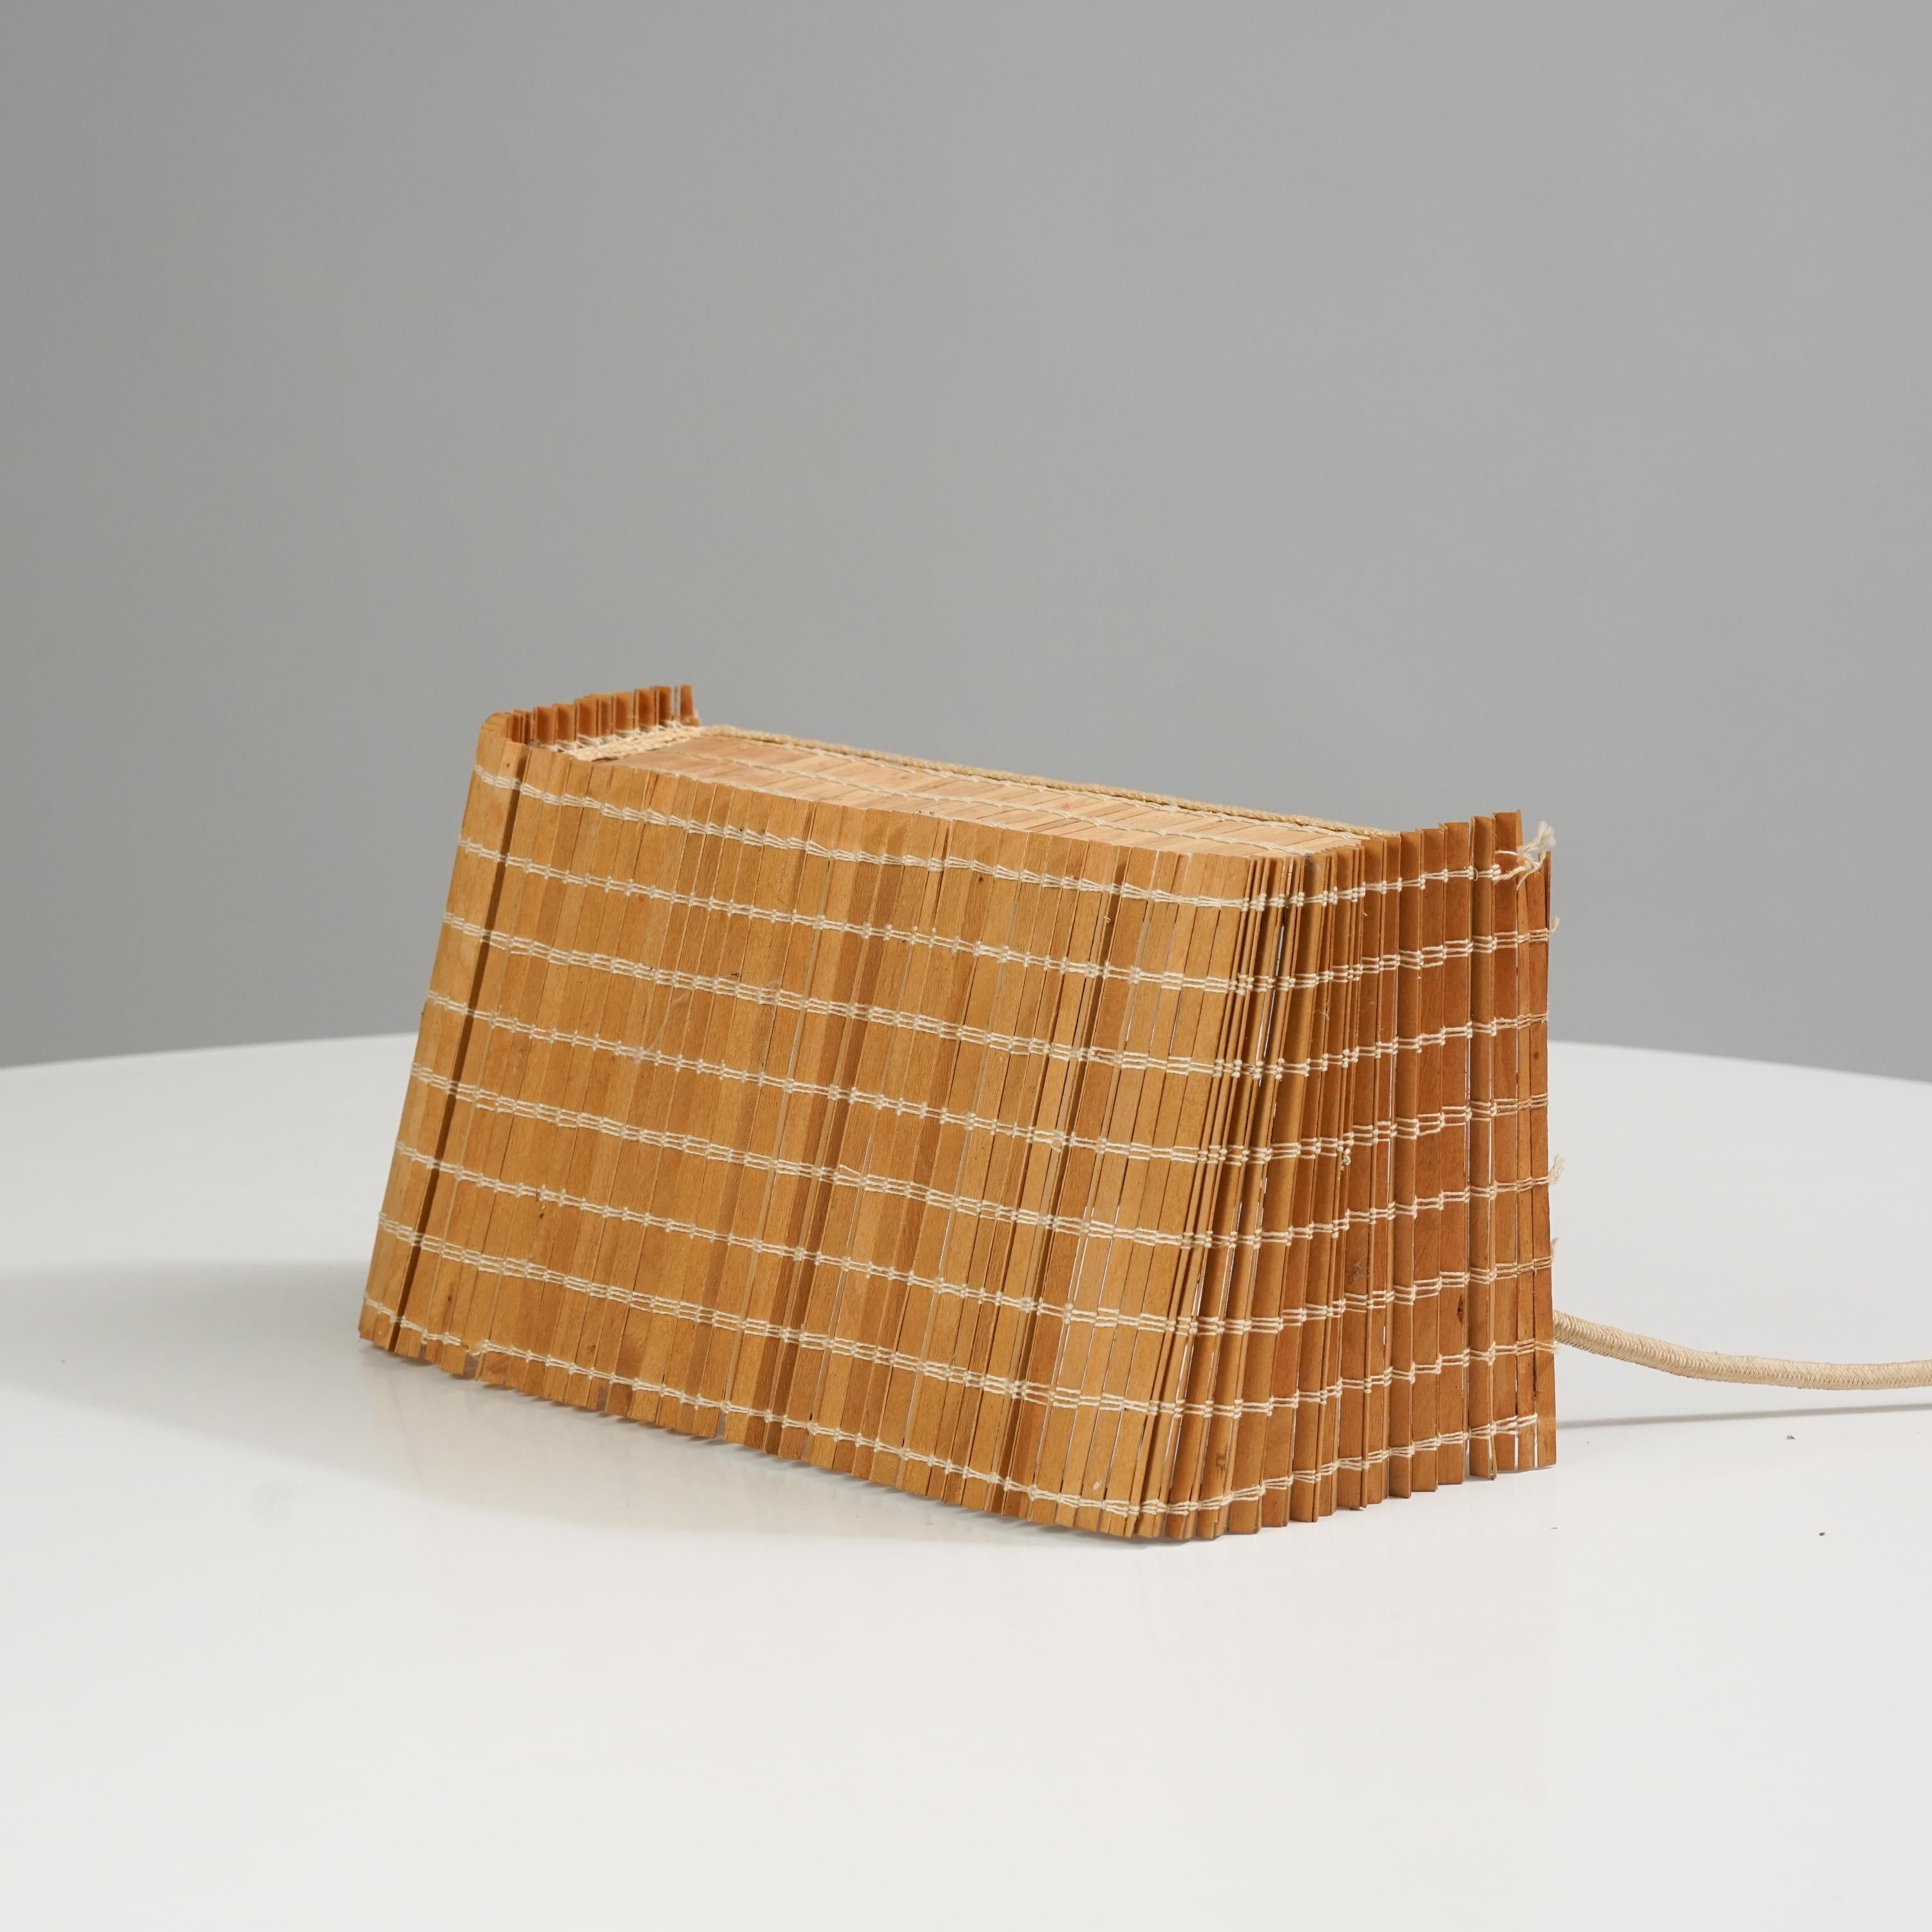 Stunning and rare wooden teak wall light by Paavo Tynell for Taito Oy from the  1950s. Minimalistic, yet stunning piece of design that gives you a beautiful light. All parts are original. Rewiring available by request. Included in the price.

Paavo